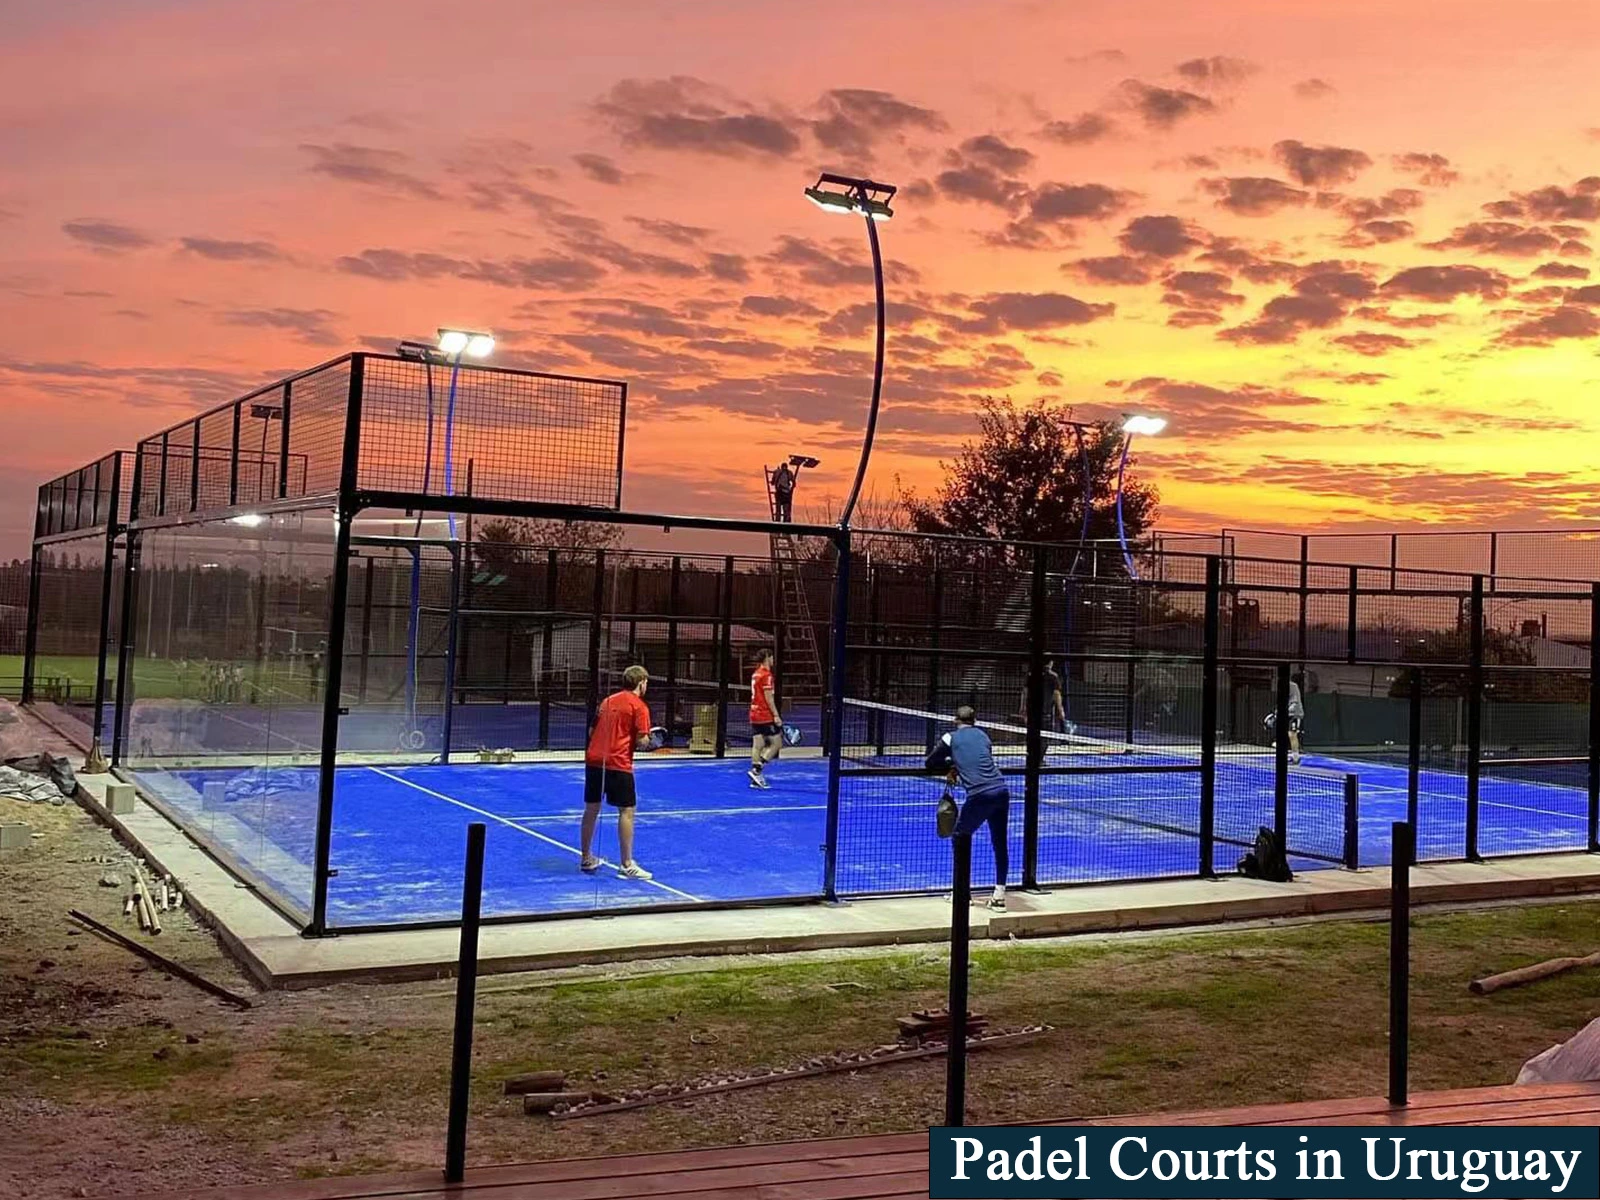 Padel Courts Construction in Uruguay